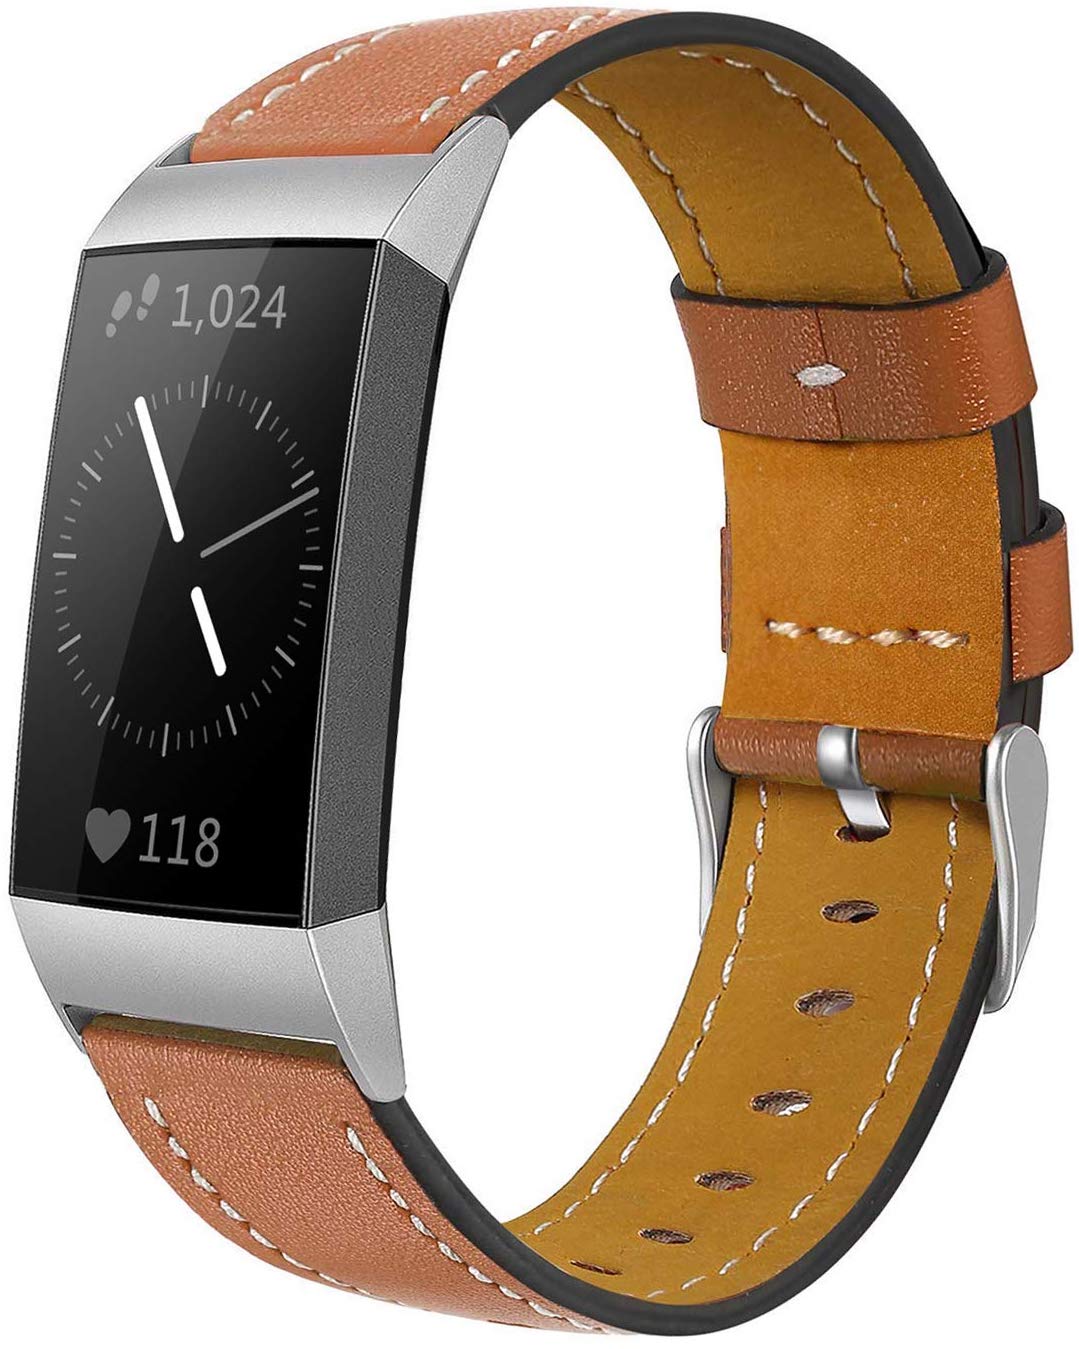 Shangpule leather band for Fitbit Charge 3/4